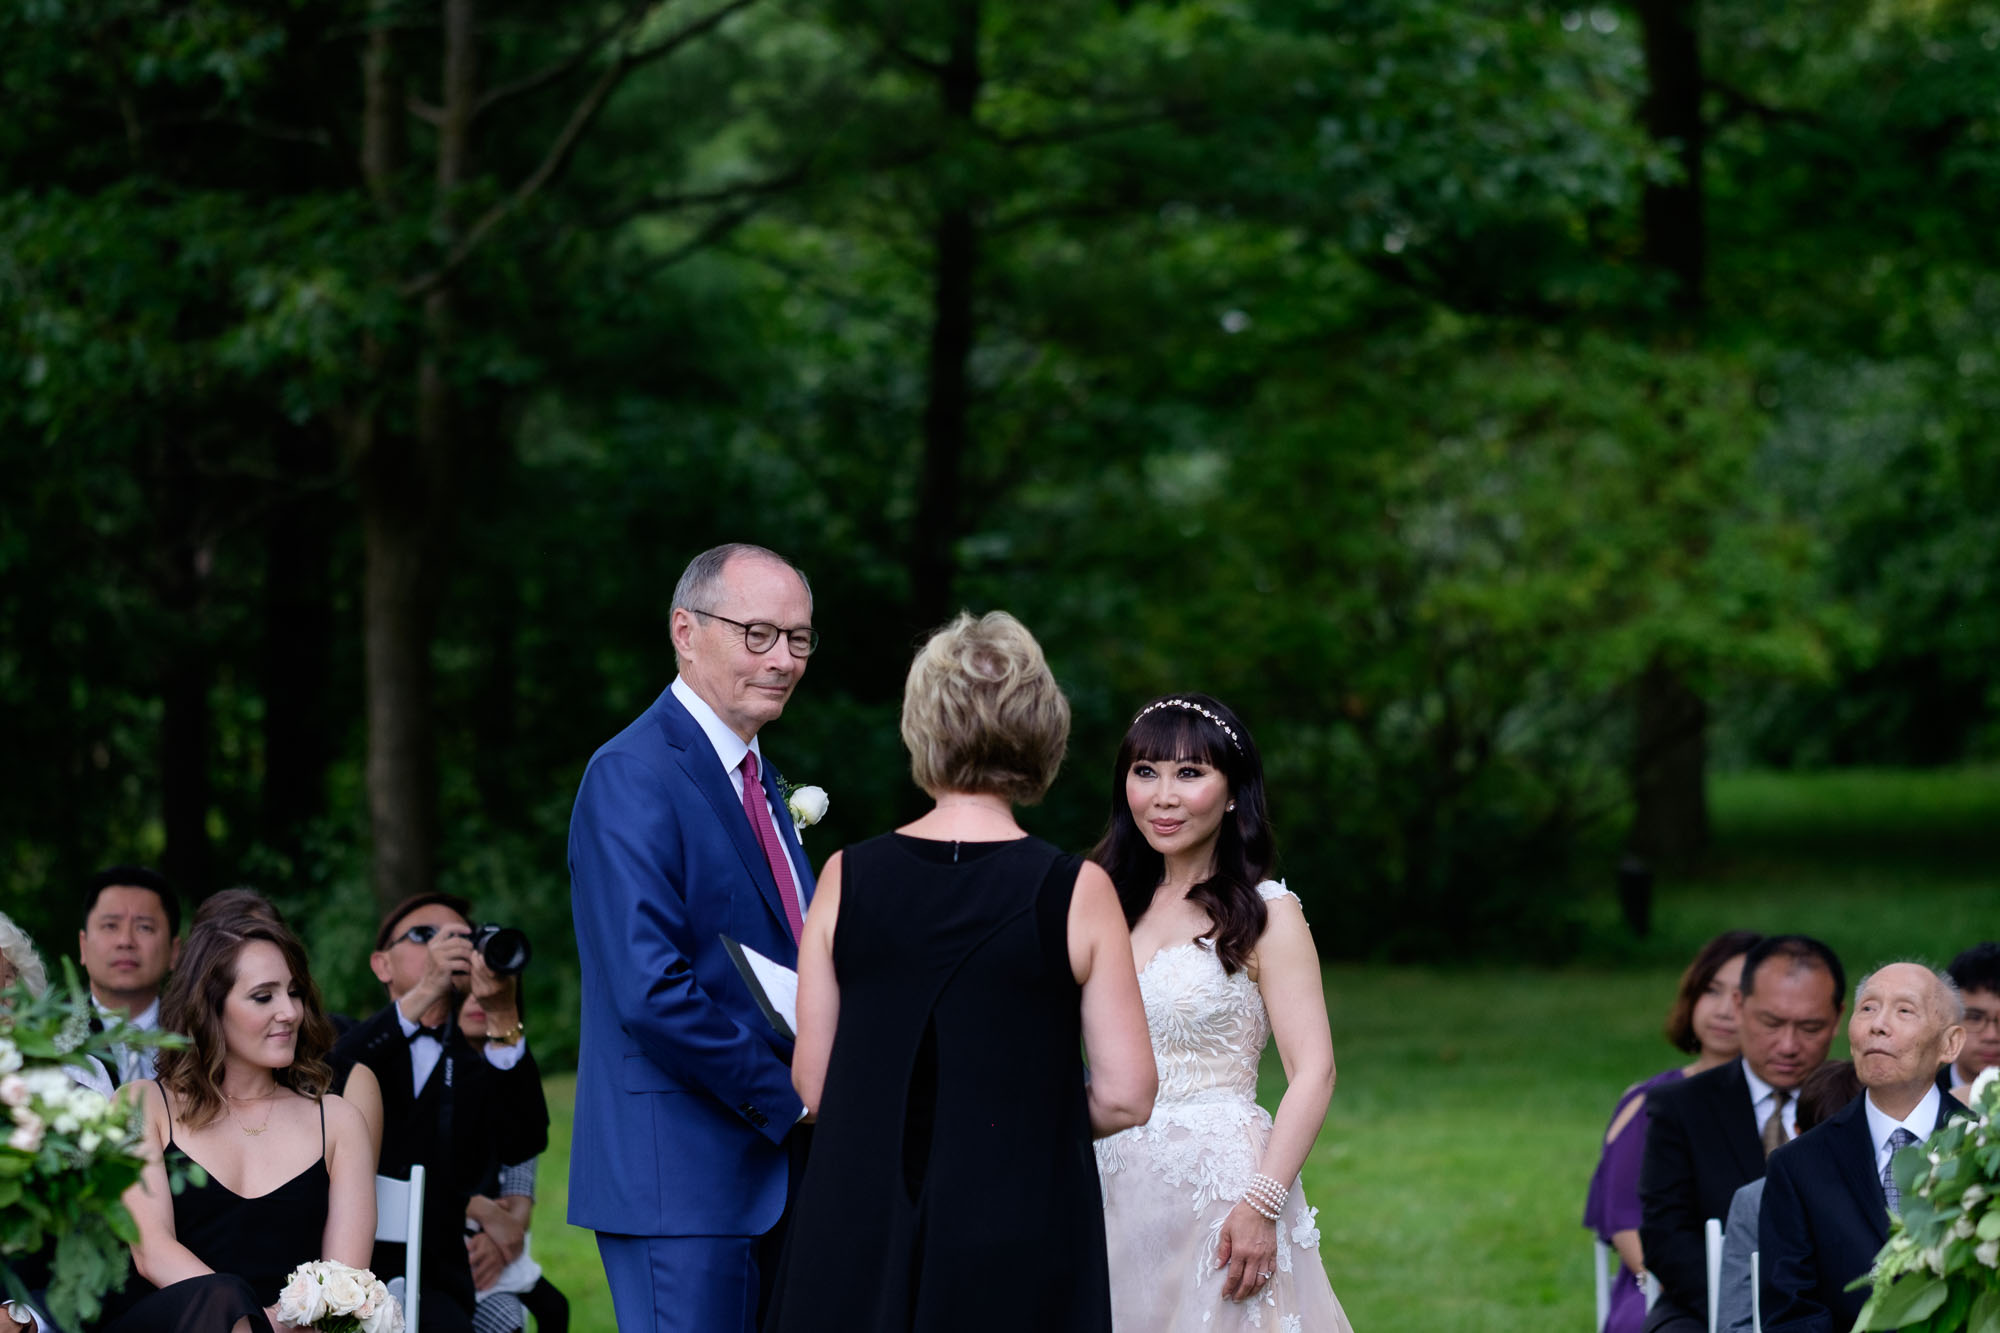  Robert and Teresa exchange wedding vows during their intimate outdoor wedding ceremony at Langdon Hall in Cambridge, Ontario by Scott Williams. 